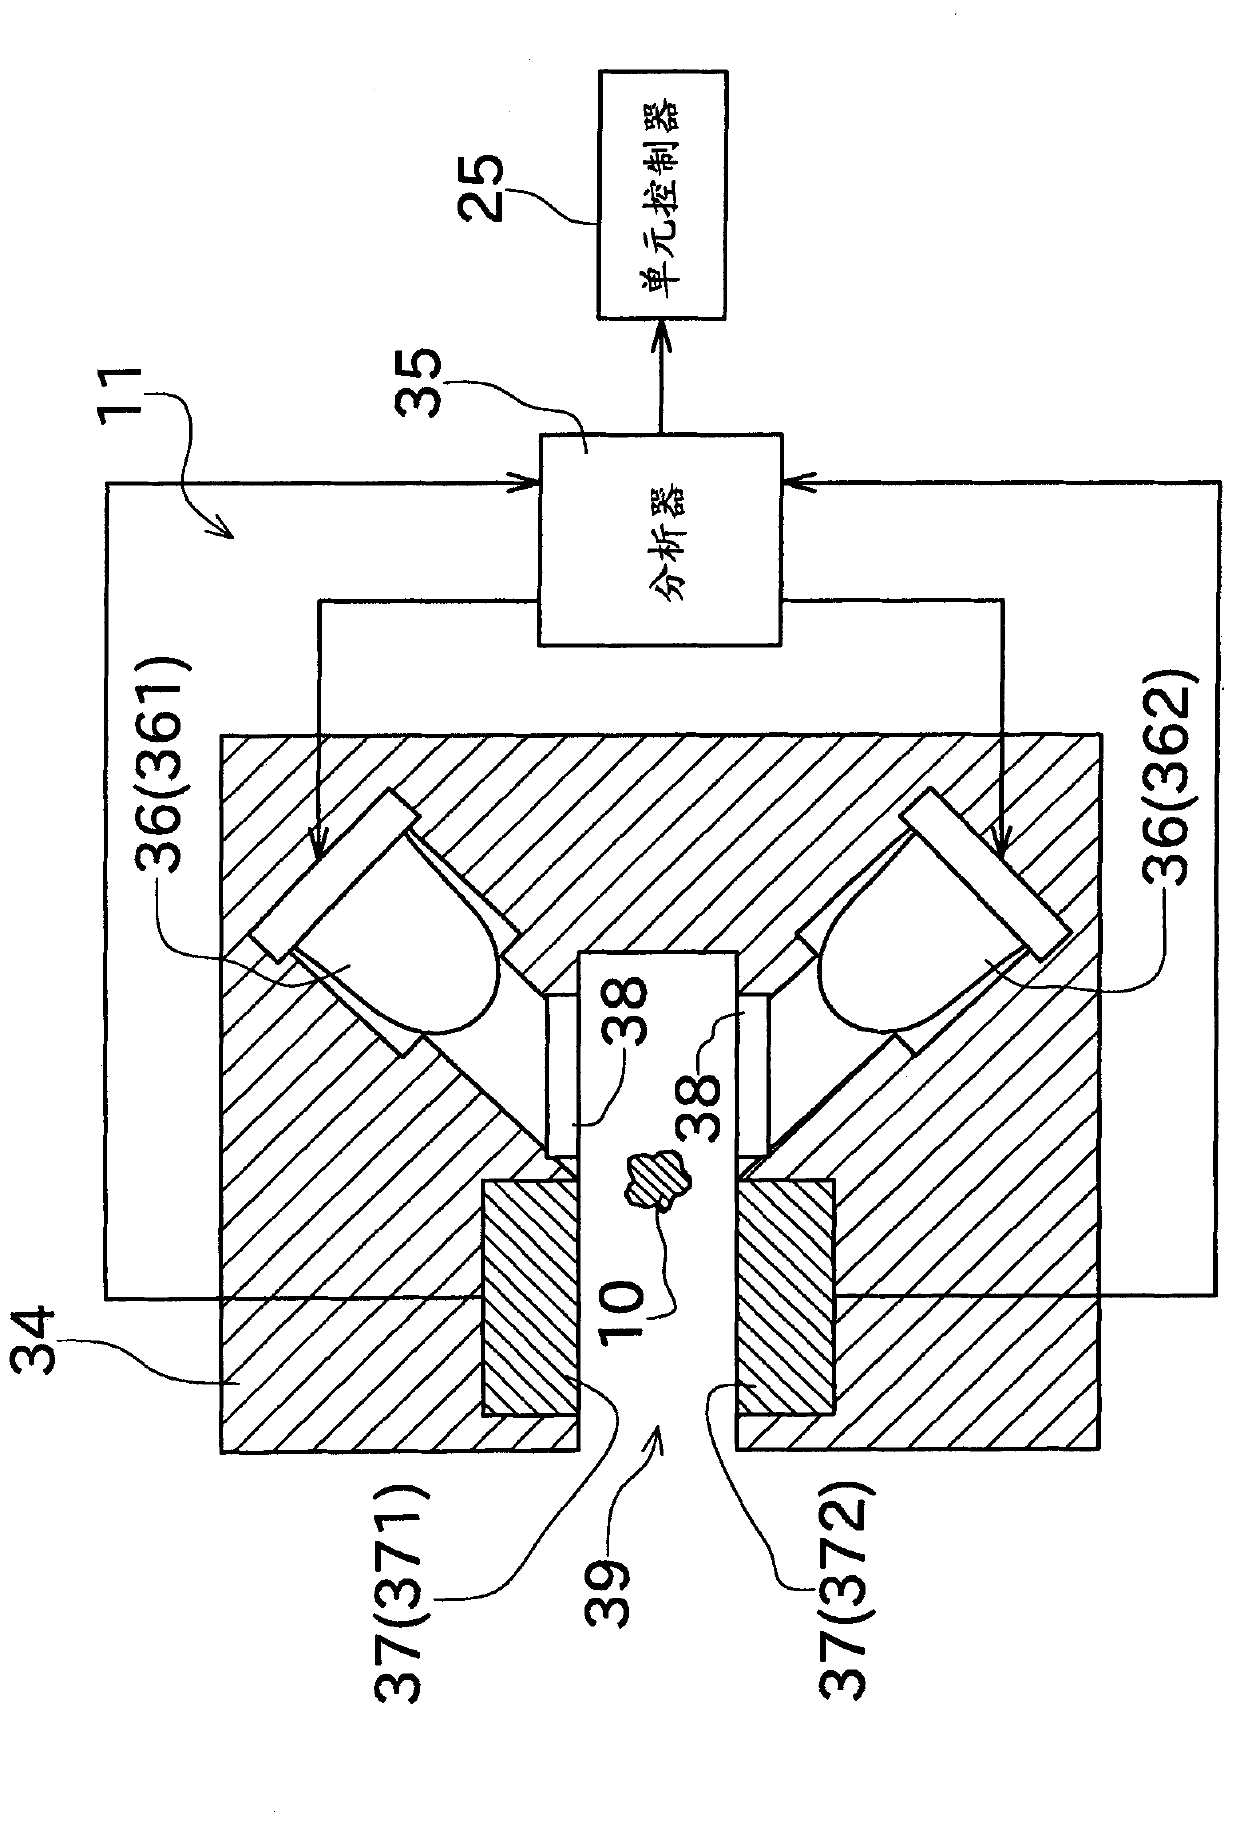 Textile-material monitoring device and yarn winding apparatus